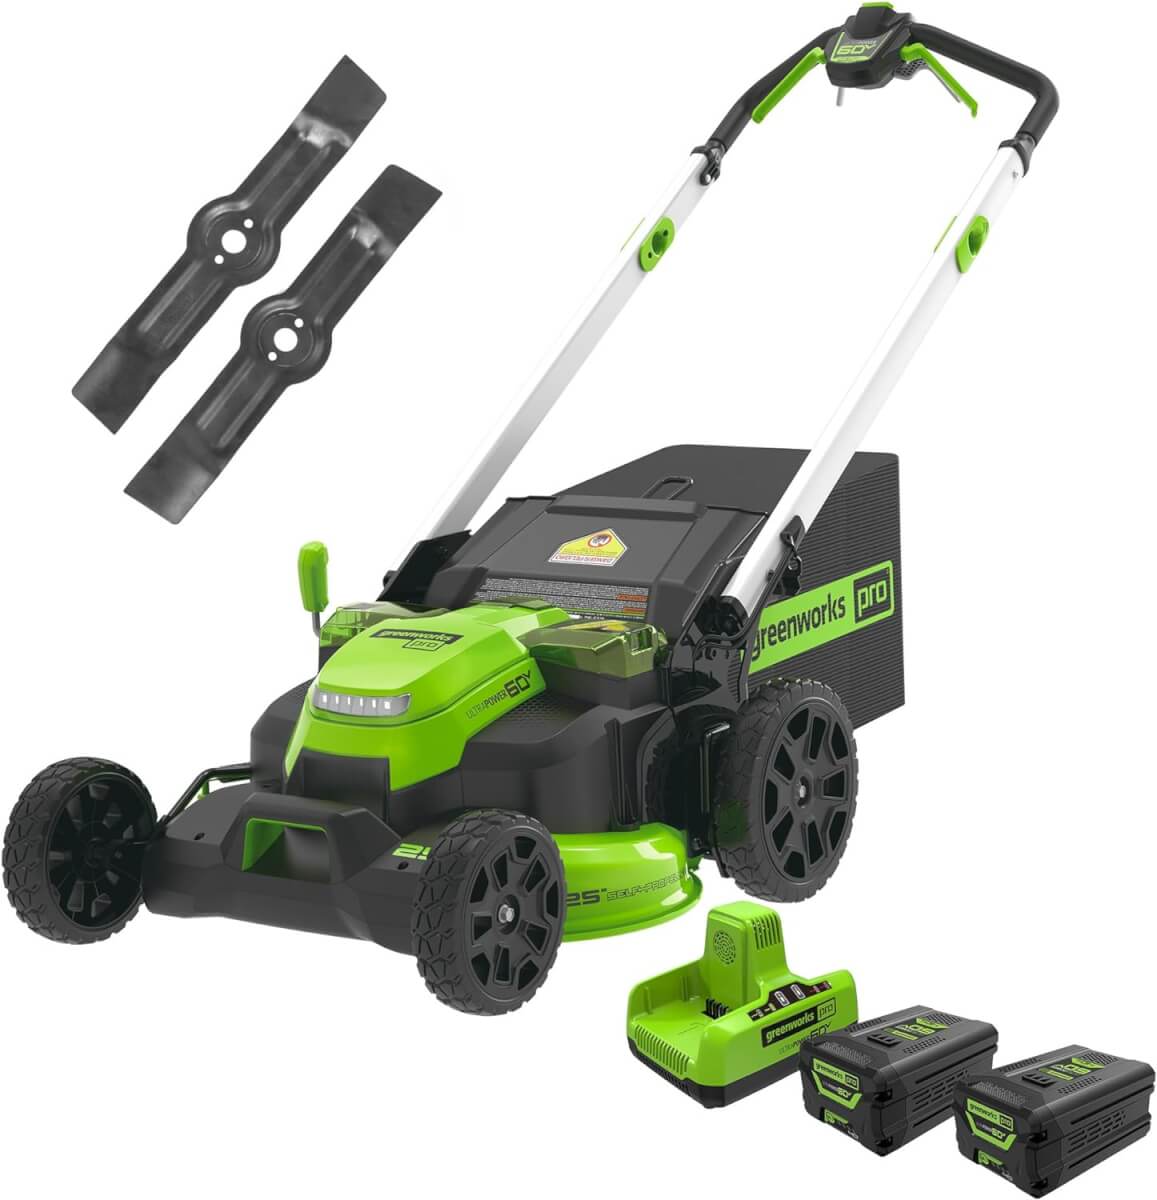 Greenworks 60V 25inch Cordless Self-propelled Lawn Mower